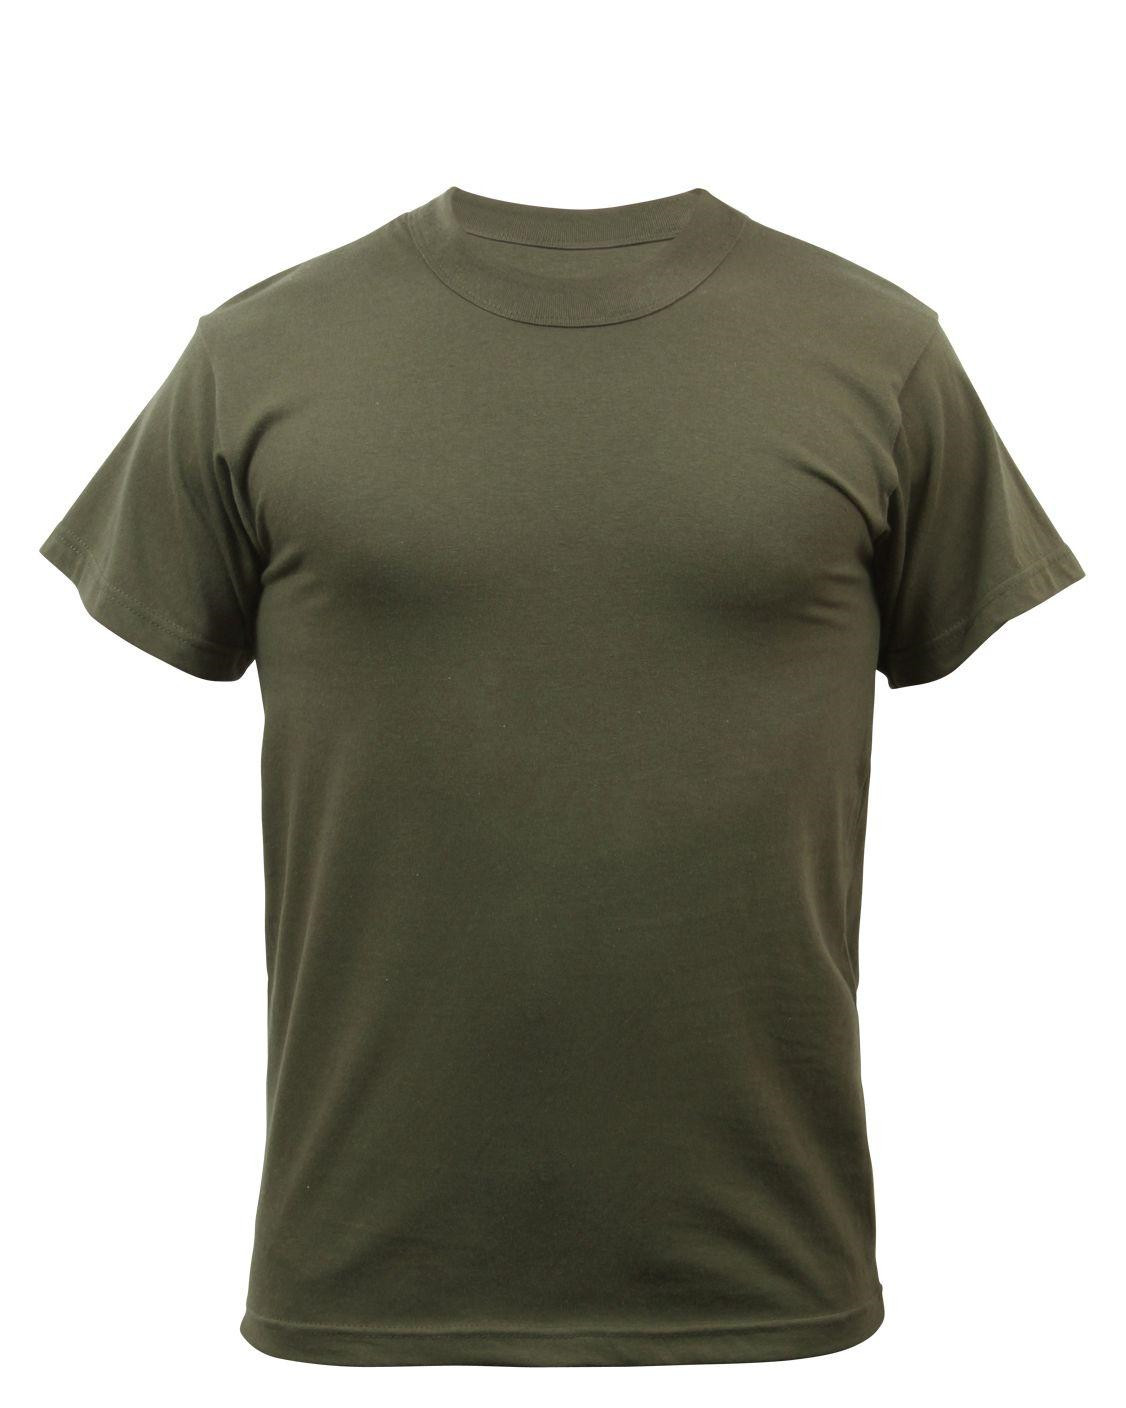 Rothco Army T-Shirt - Poly/Bomuld (Oliven, L)